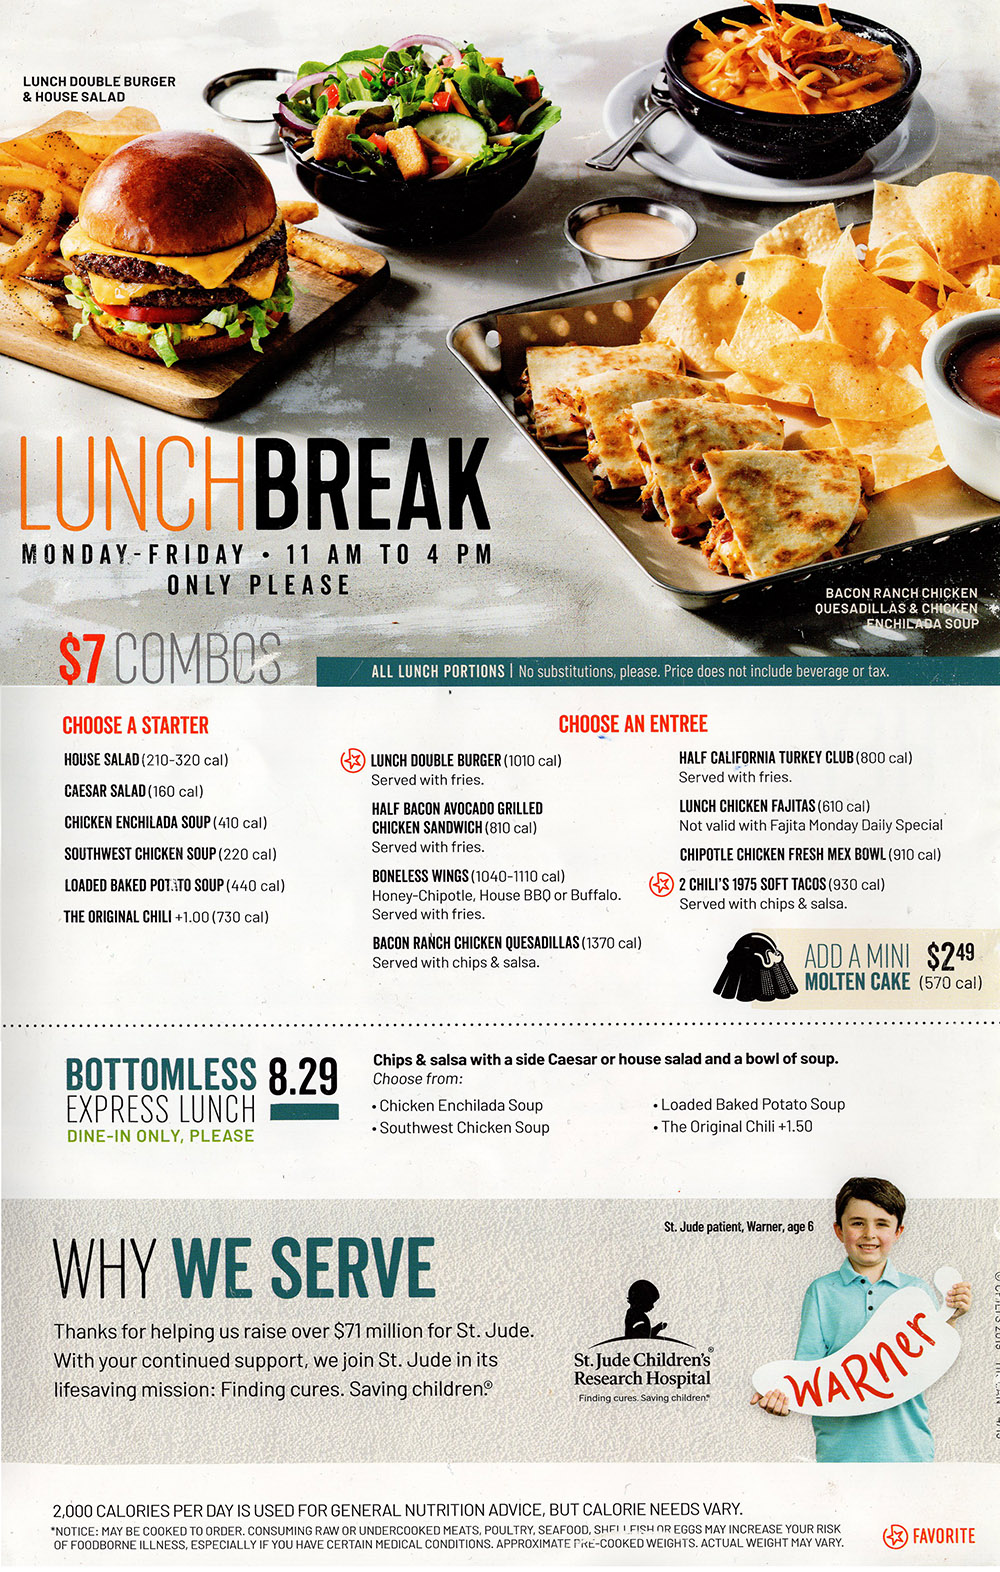 Chili's Grill & Bar Menu - Lincoln Nebraska - Provided by Metro Dining Delivery